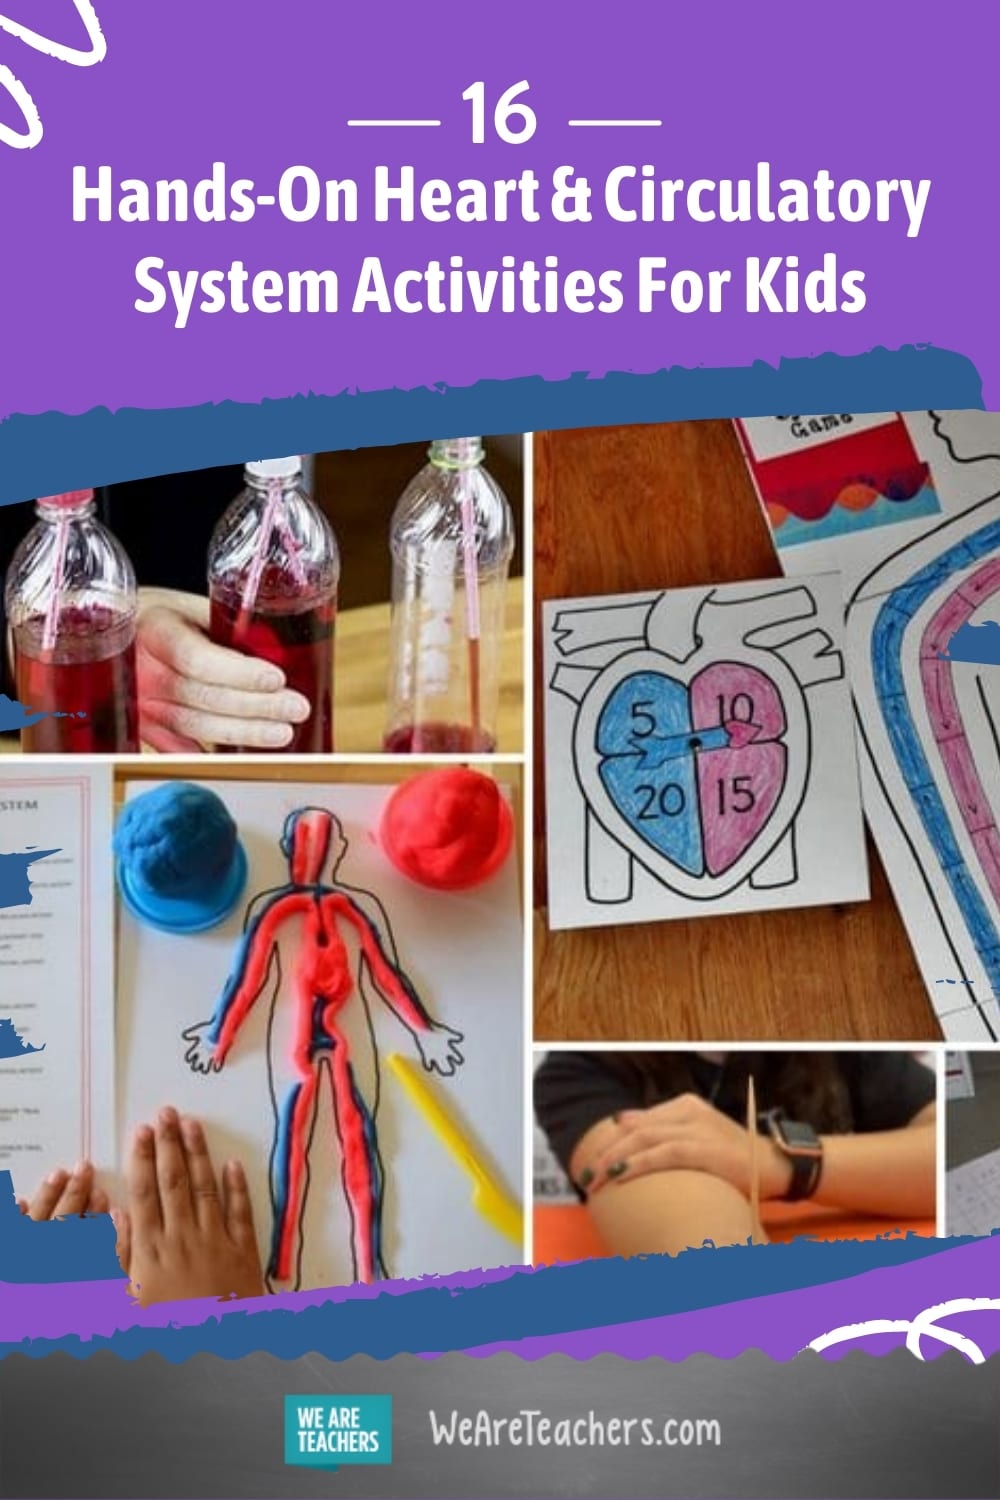 16 Hands-On Heart and Circulatory System Activities For Kids